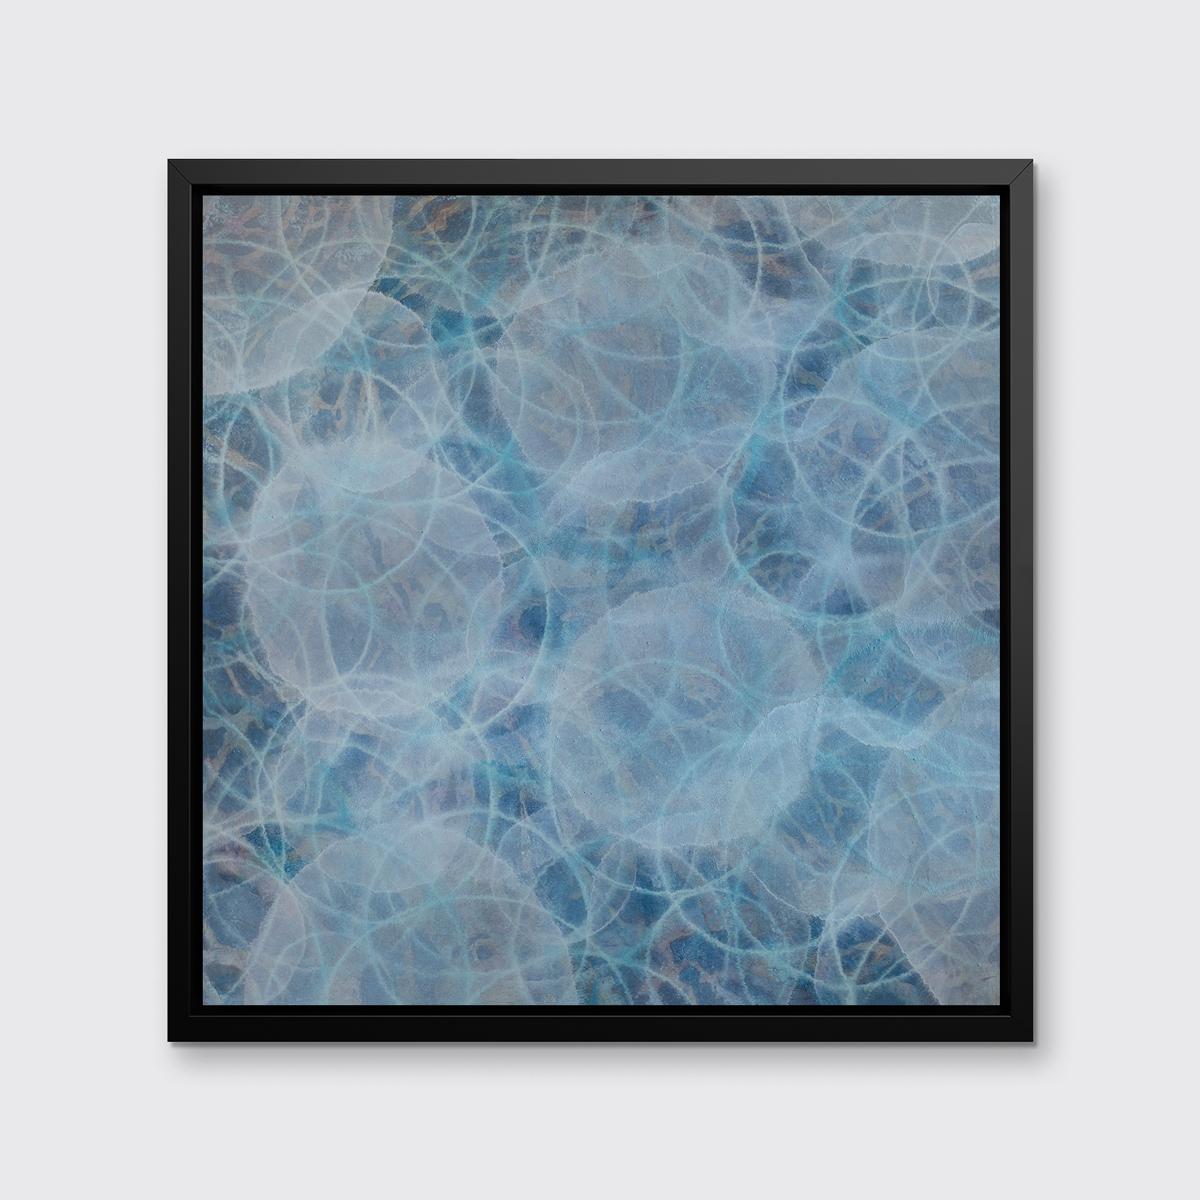 This abstract limited edition print by Roger Mudre features a cool palette. Imperfect, almost organic circular shapes and outlines in varying shades of blue are layered over one another throughout the almost geometric composition. 

This Limited